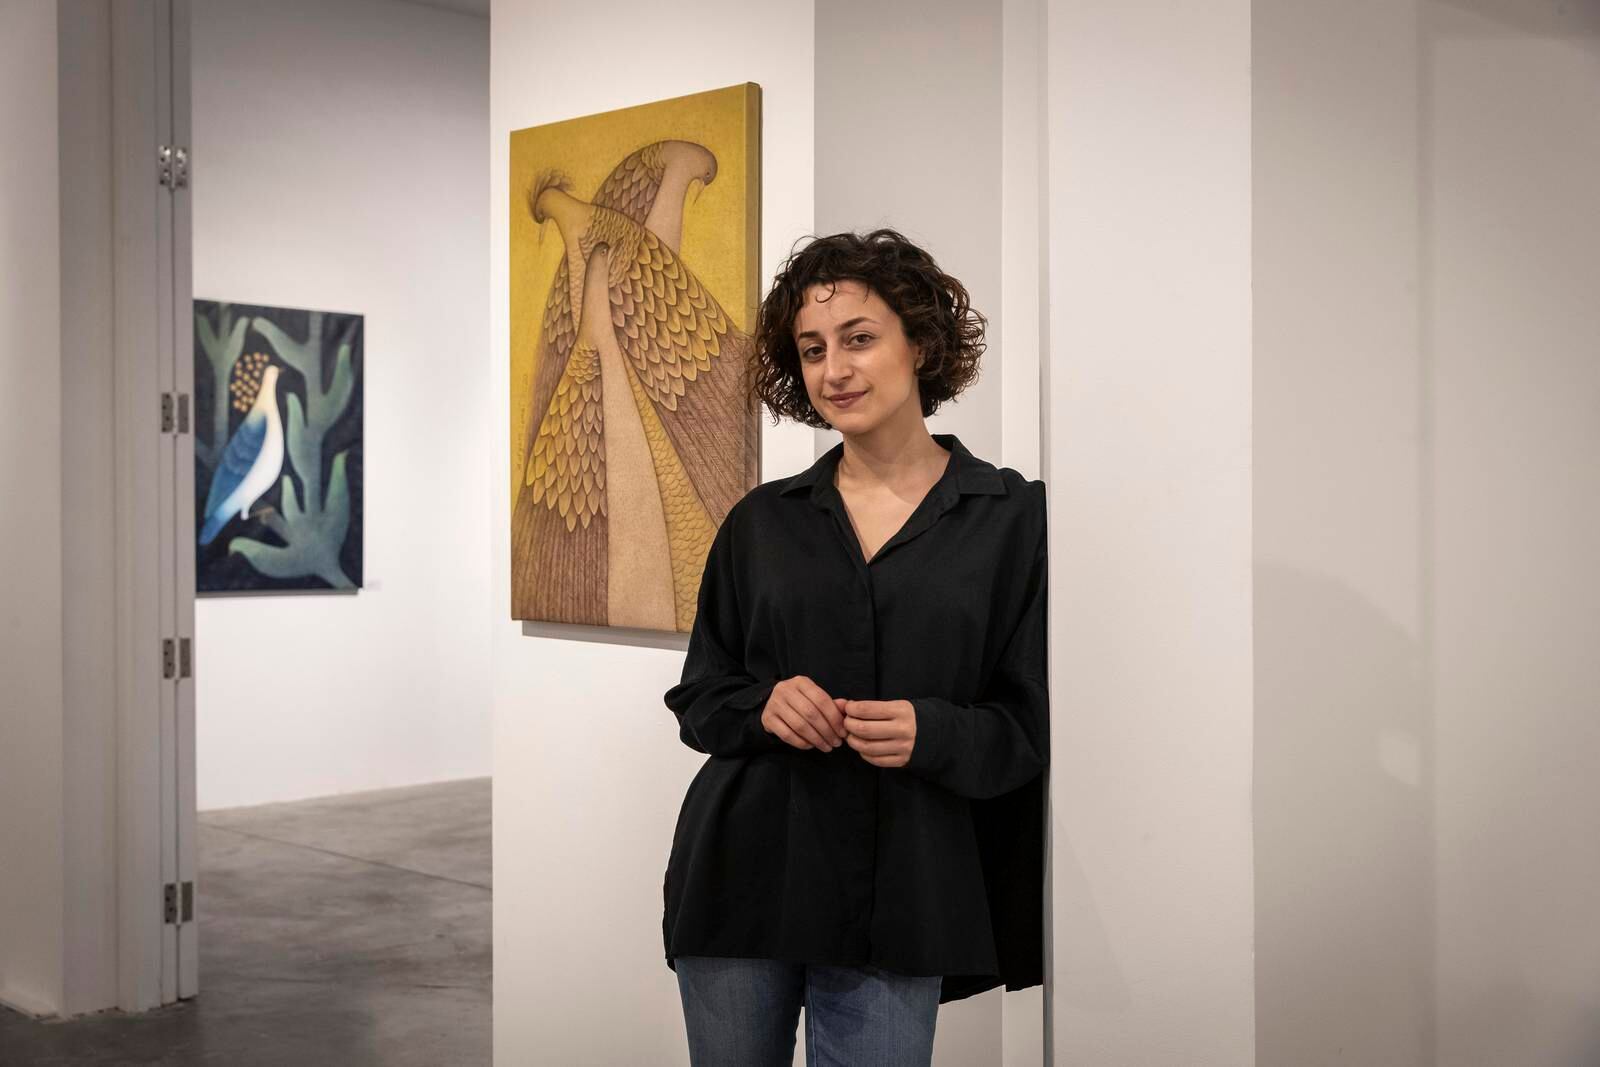 Iranian artist Maryam Lamei’s first exhibition in the UAE explores ...